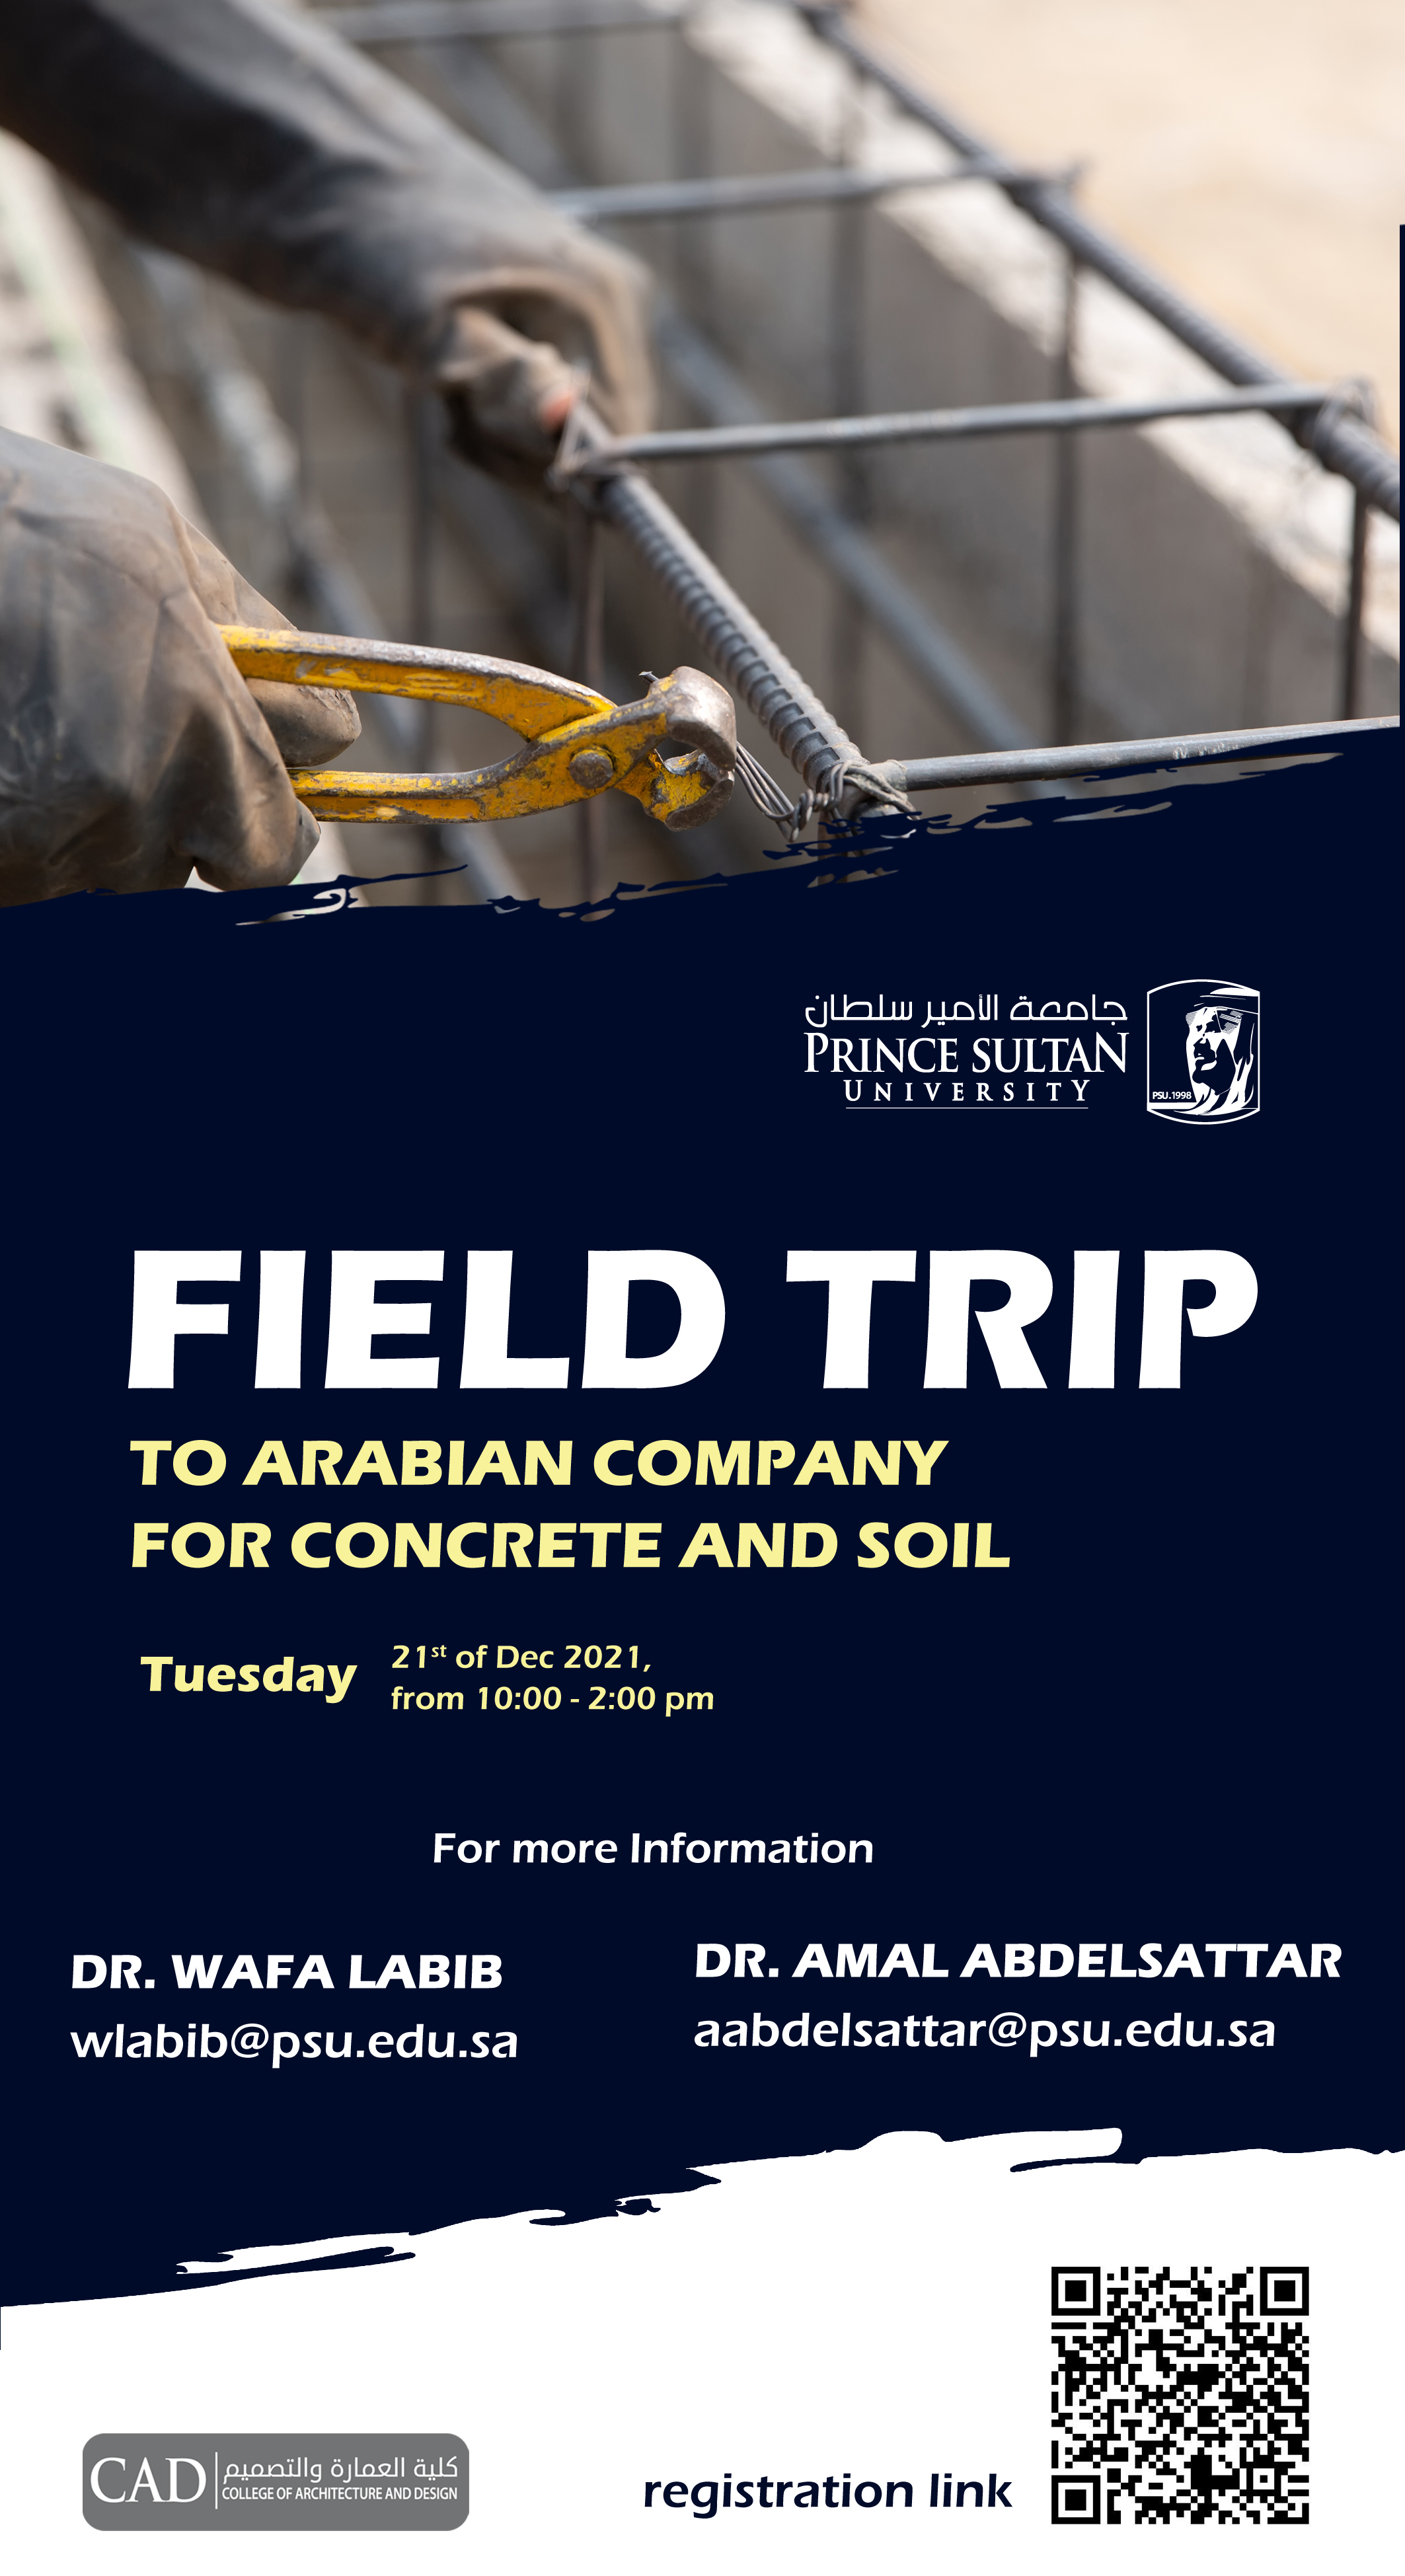 field trip to the Arabian Laboratory for Testing Concrete and Soil